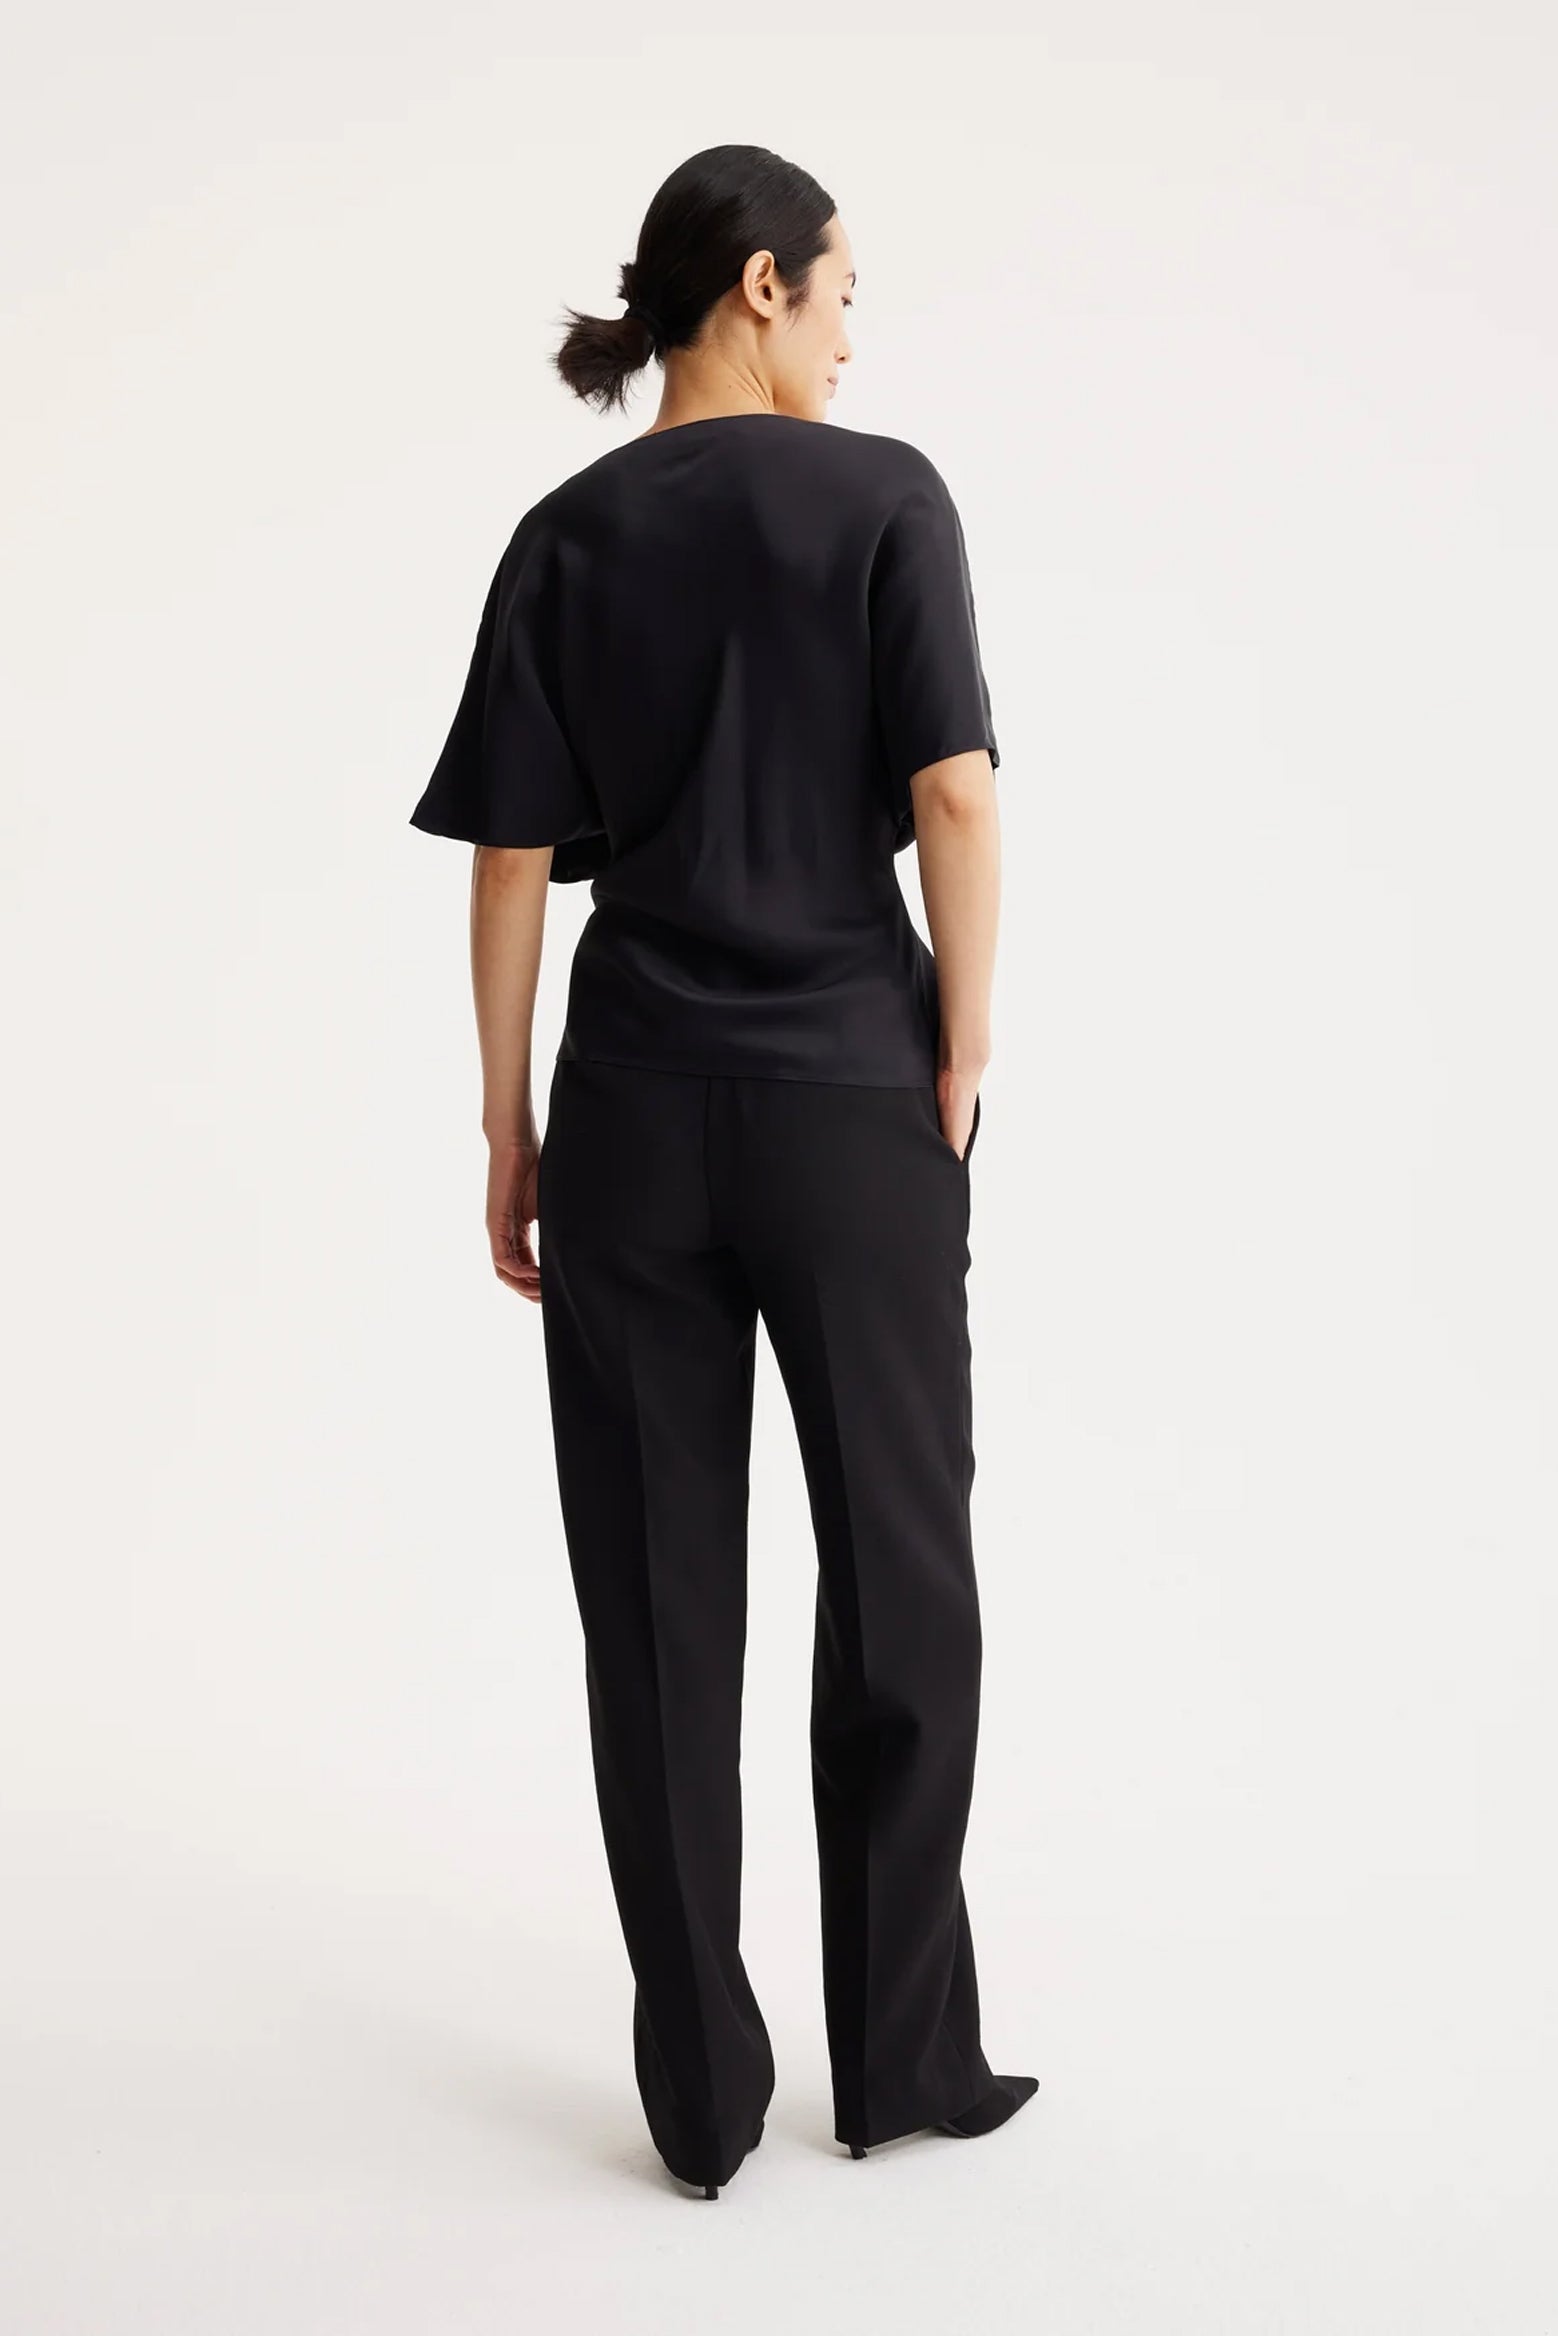 Rohe Fluid Satin Top in Noir available at The New Trend Australia.